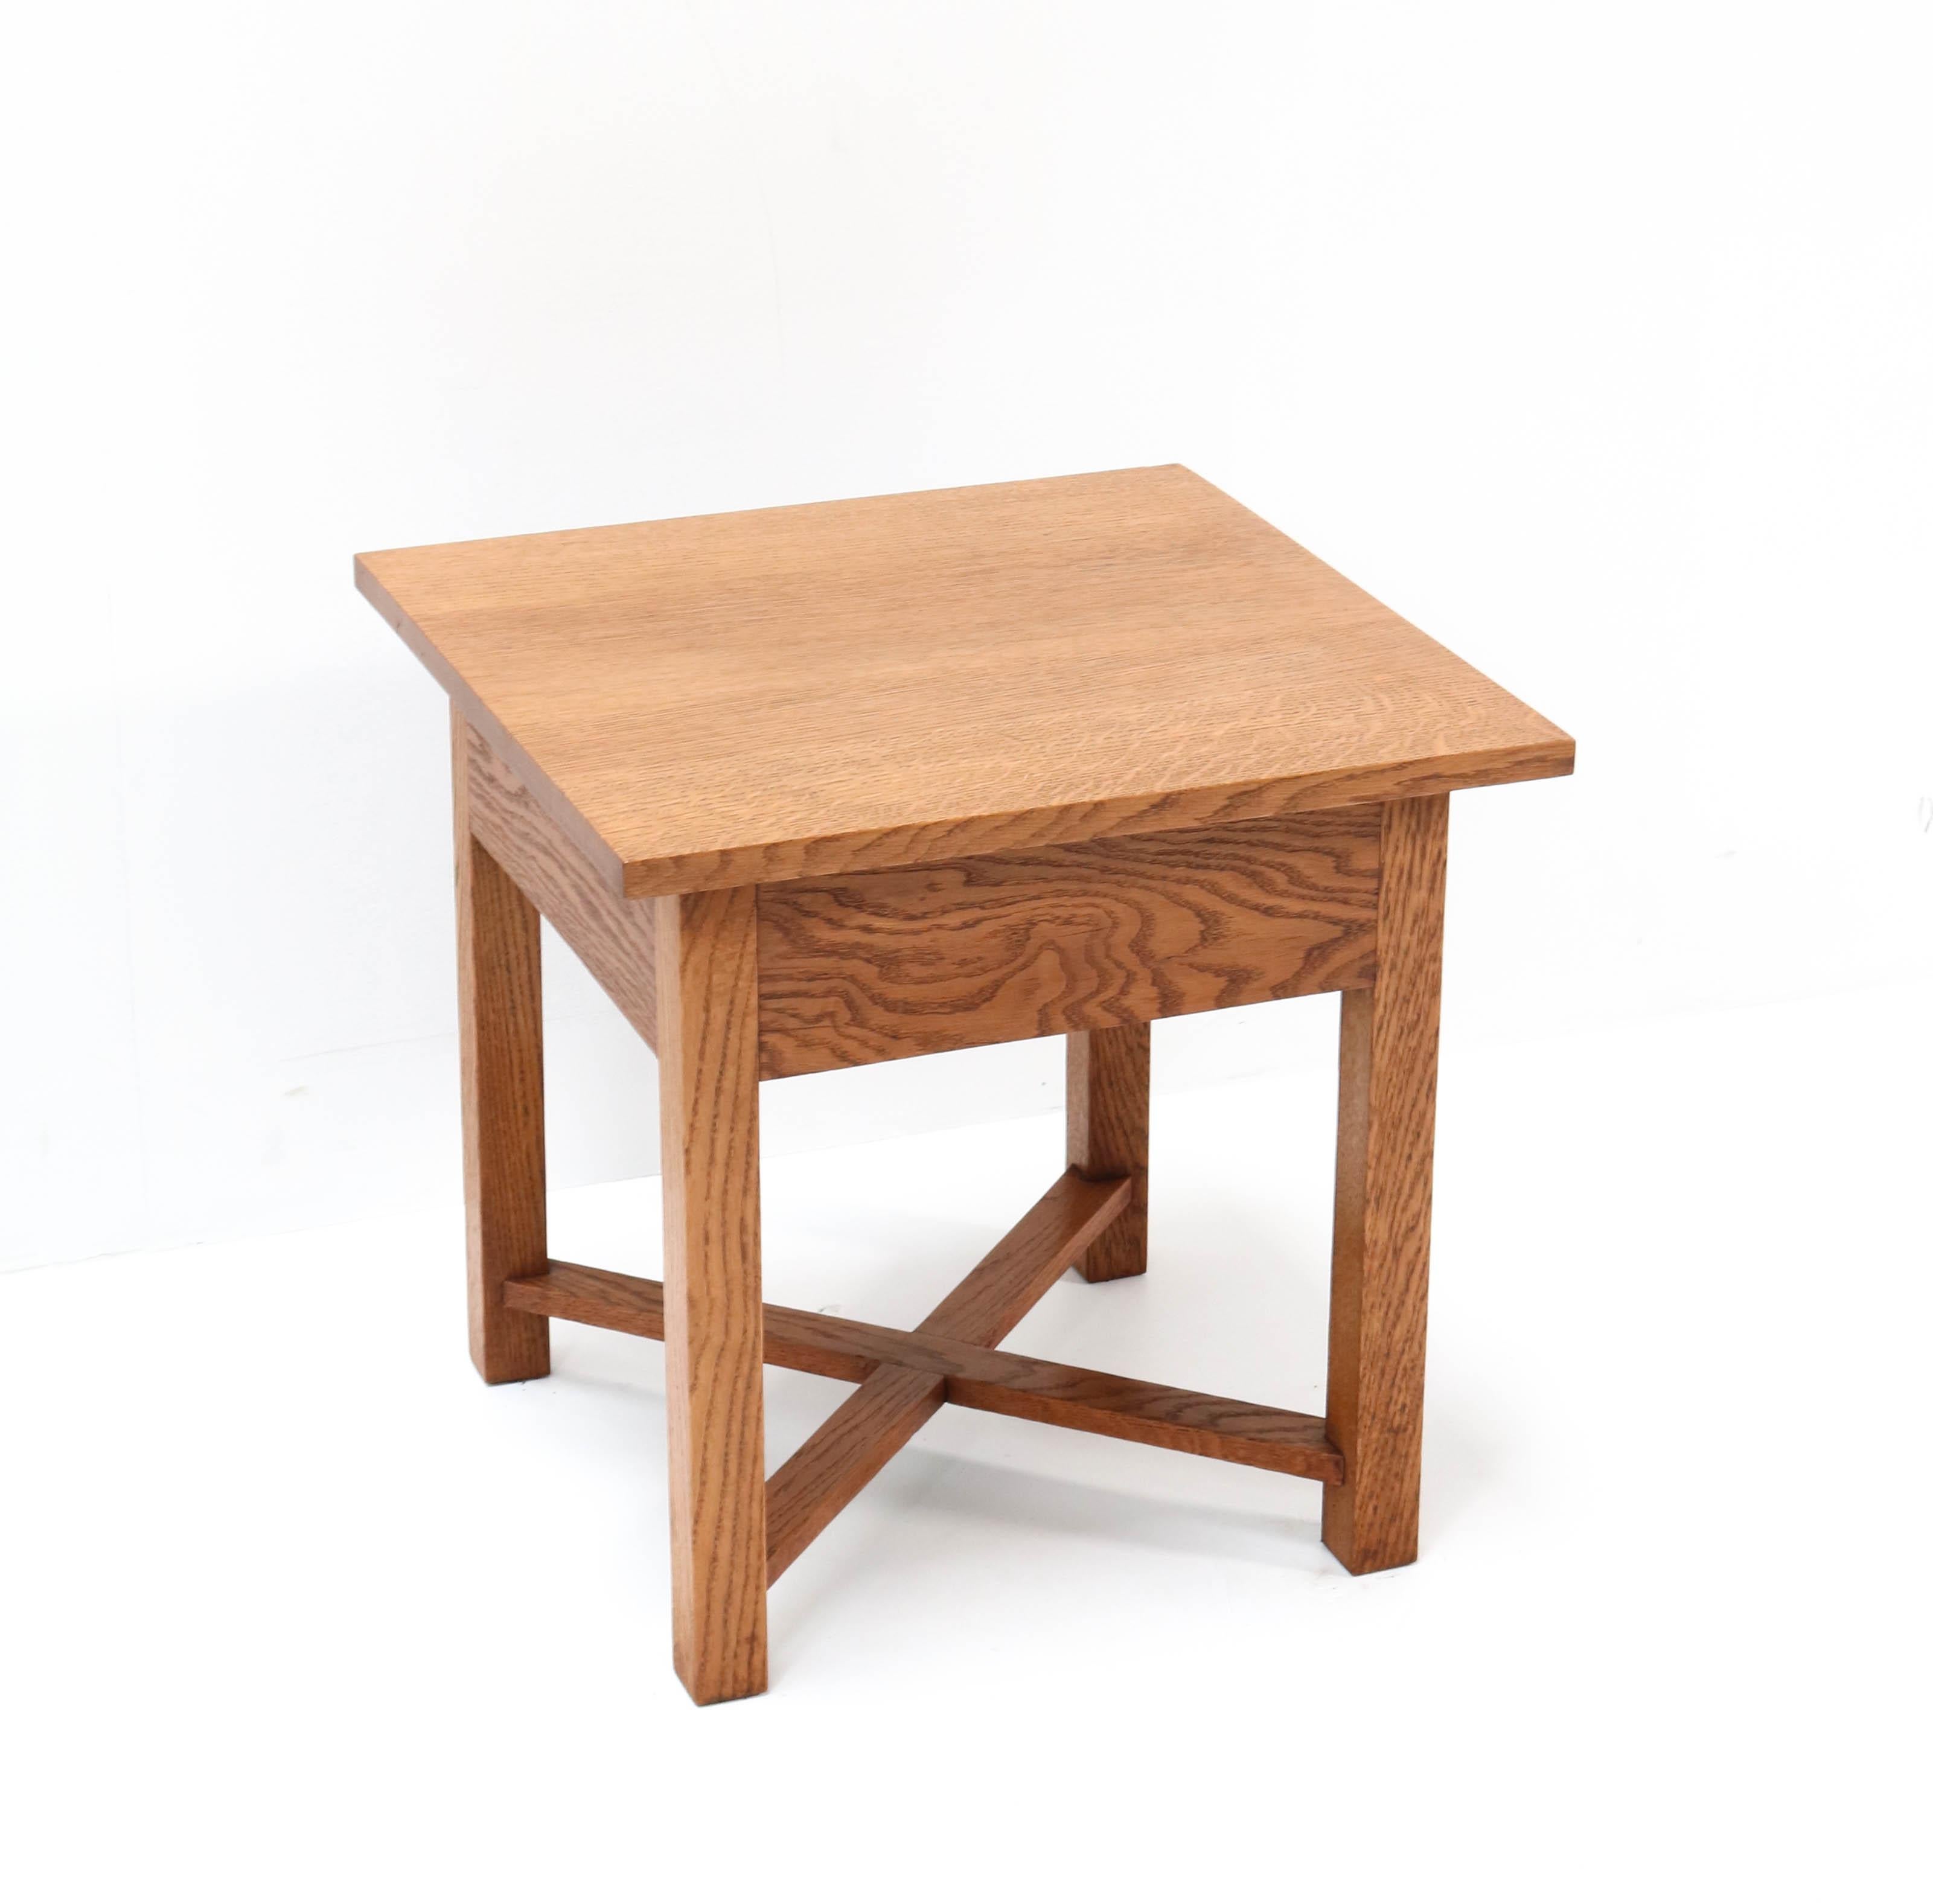 Magnificent and ultra rare Art Deco Haagse School side table.
Design by Cor Alons.
Striking Dutch design from the 1920s.
This wonderful and iconic solid oak side table was designed for a small villa designed
by the famous Dutch architects Jan